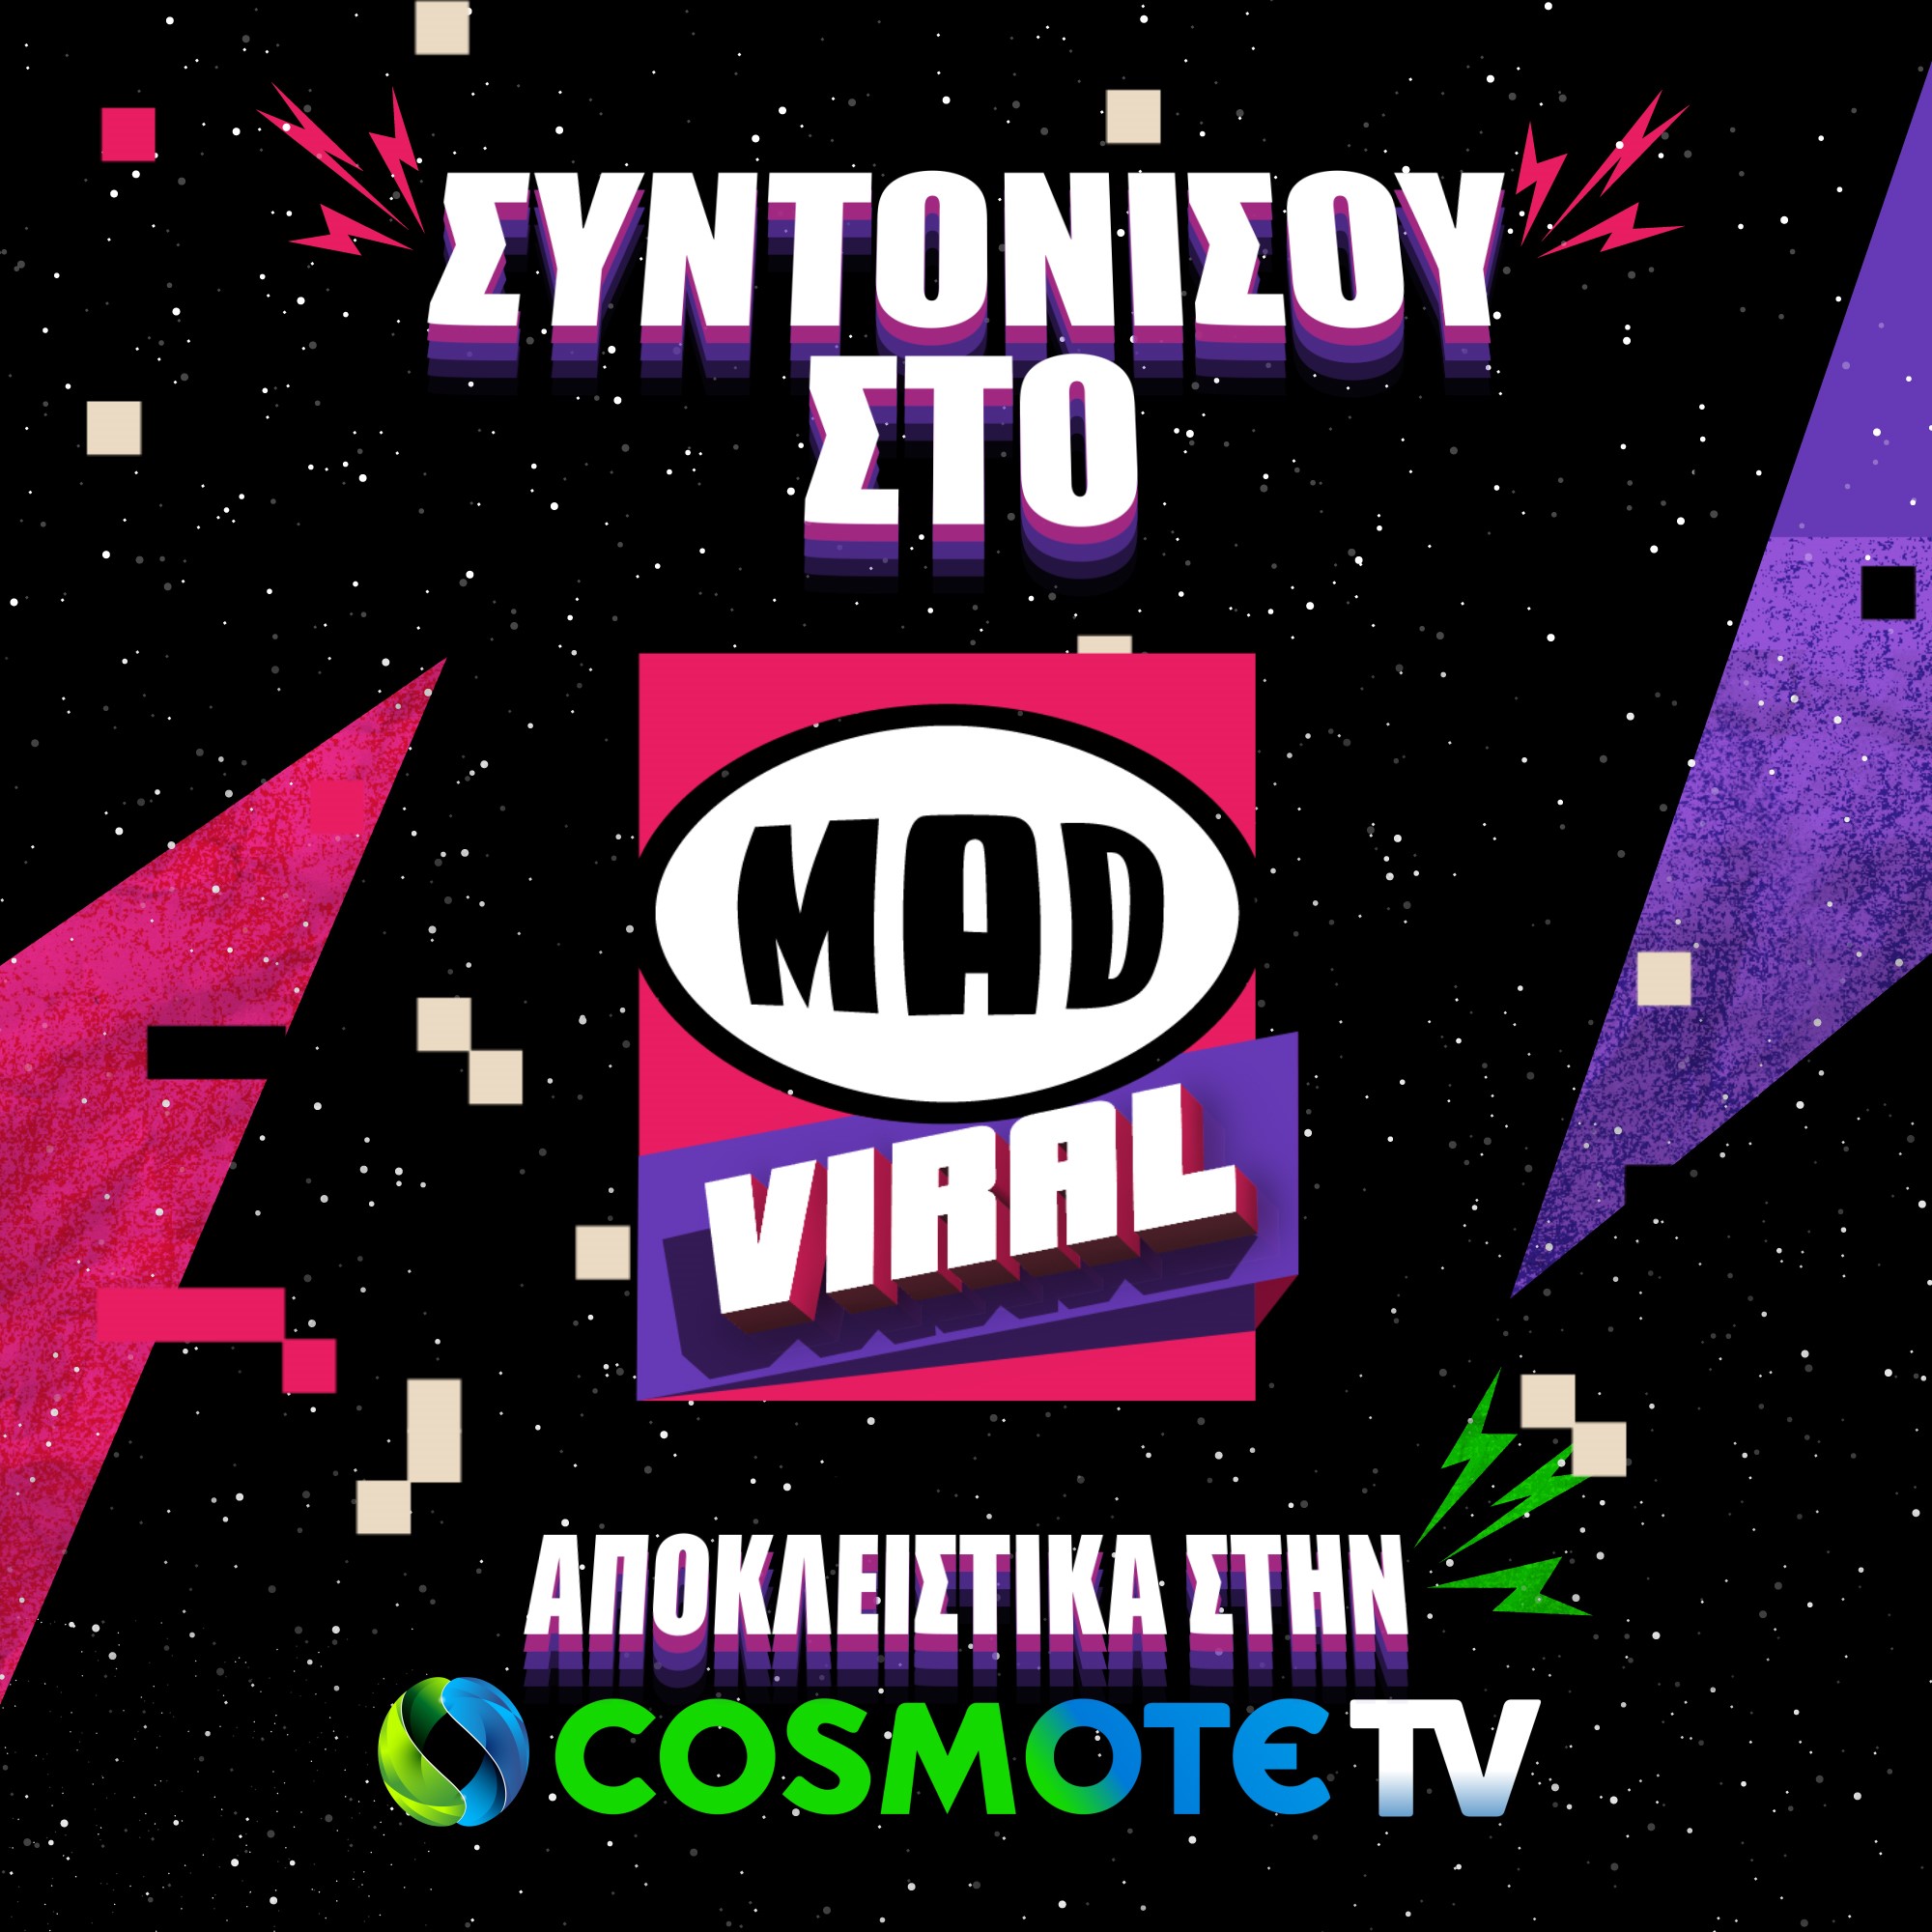 To MAD VIRAL έρχεται στην COSMOTE TV από τις 9 Δεκεμβρίου